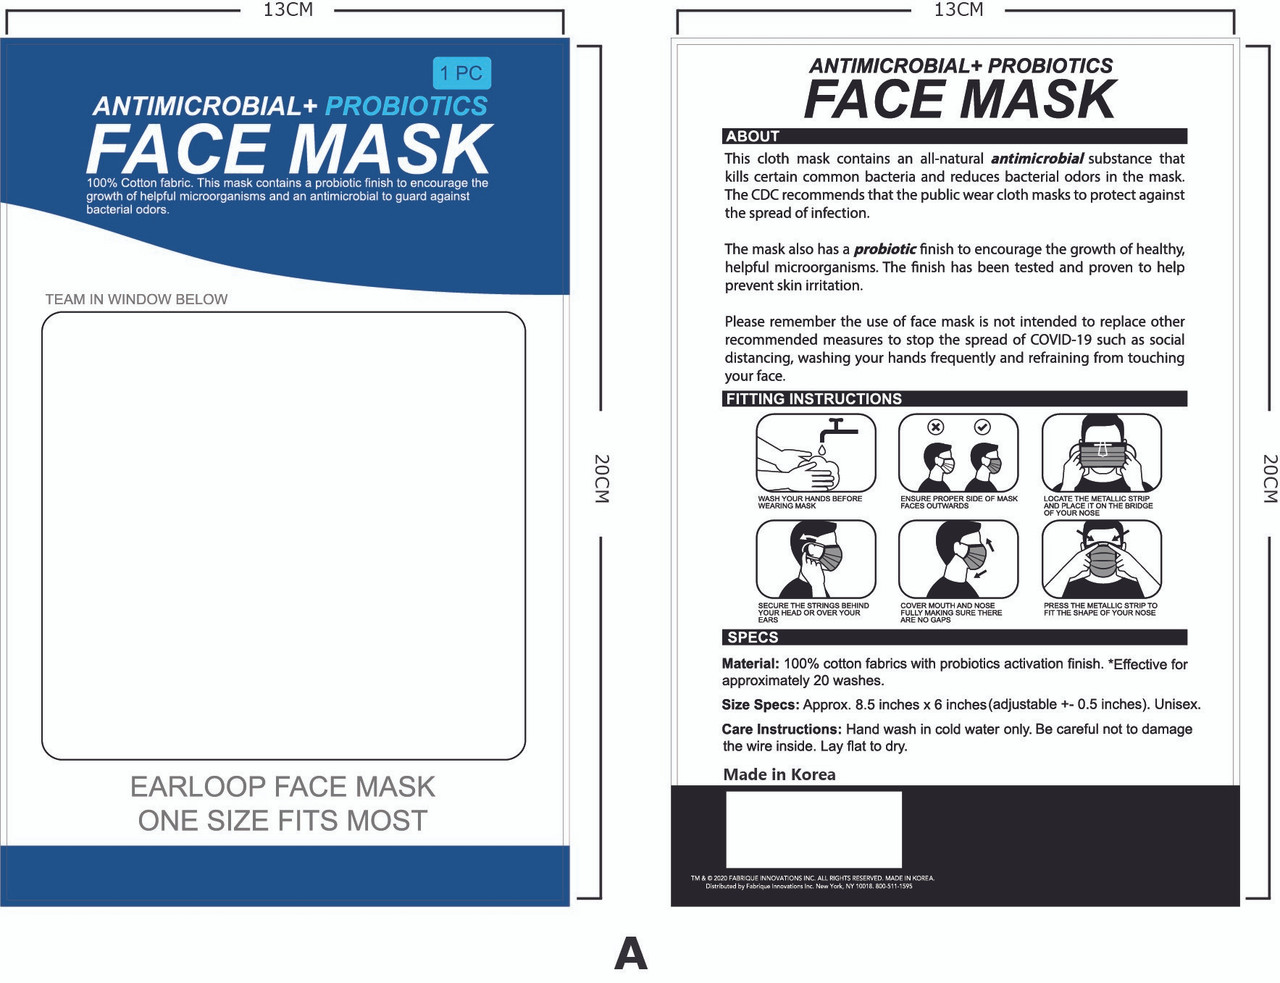 Fire Fighter Face Mask-With Anti-microbial & Probiotics-100% Cotton-Individually Packaged-Adjustable Earloop